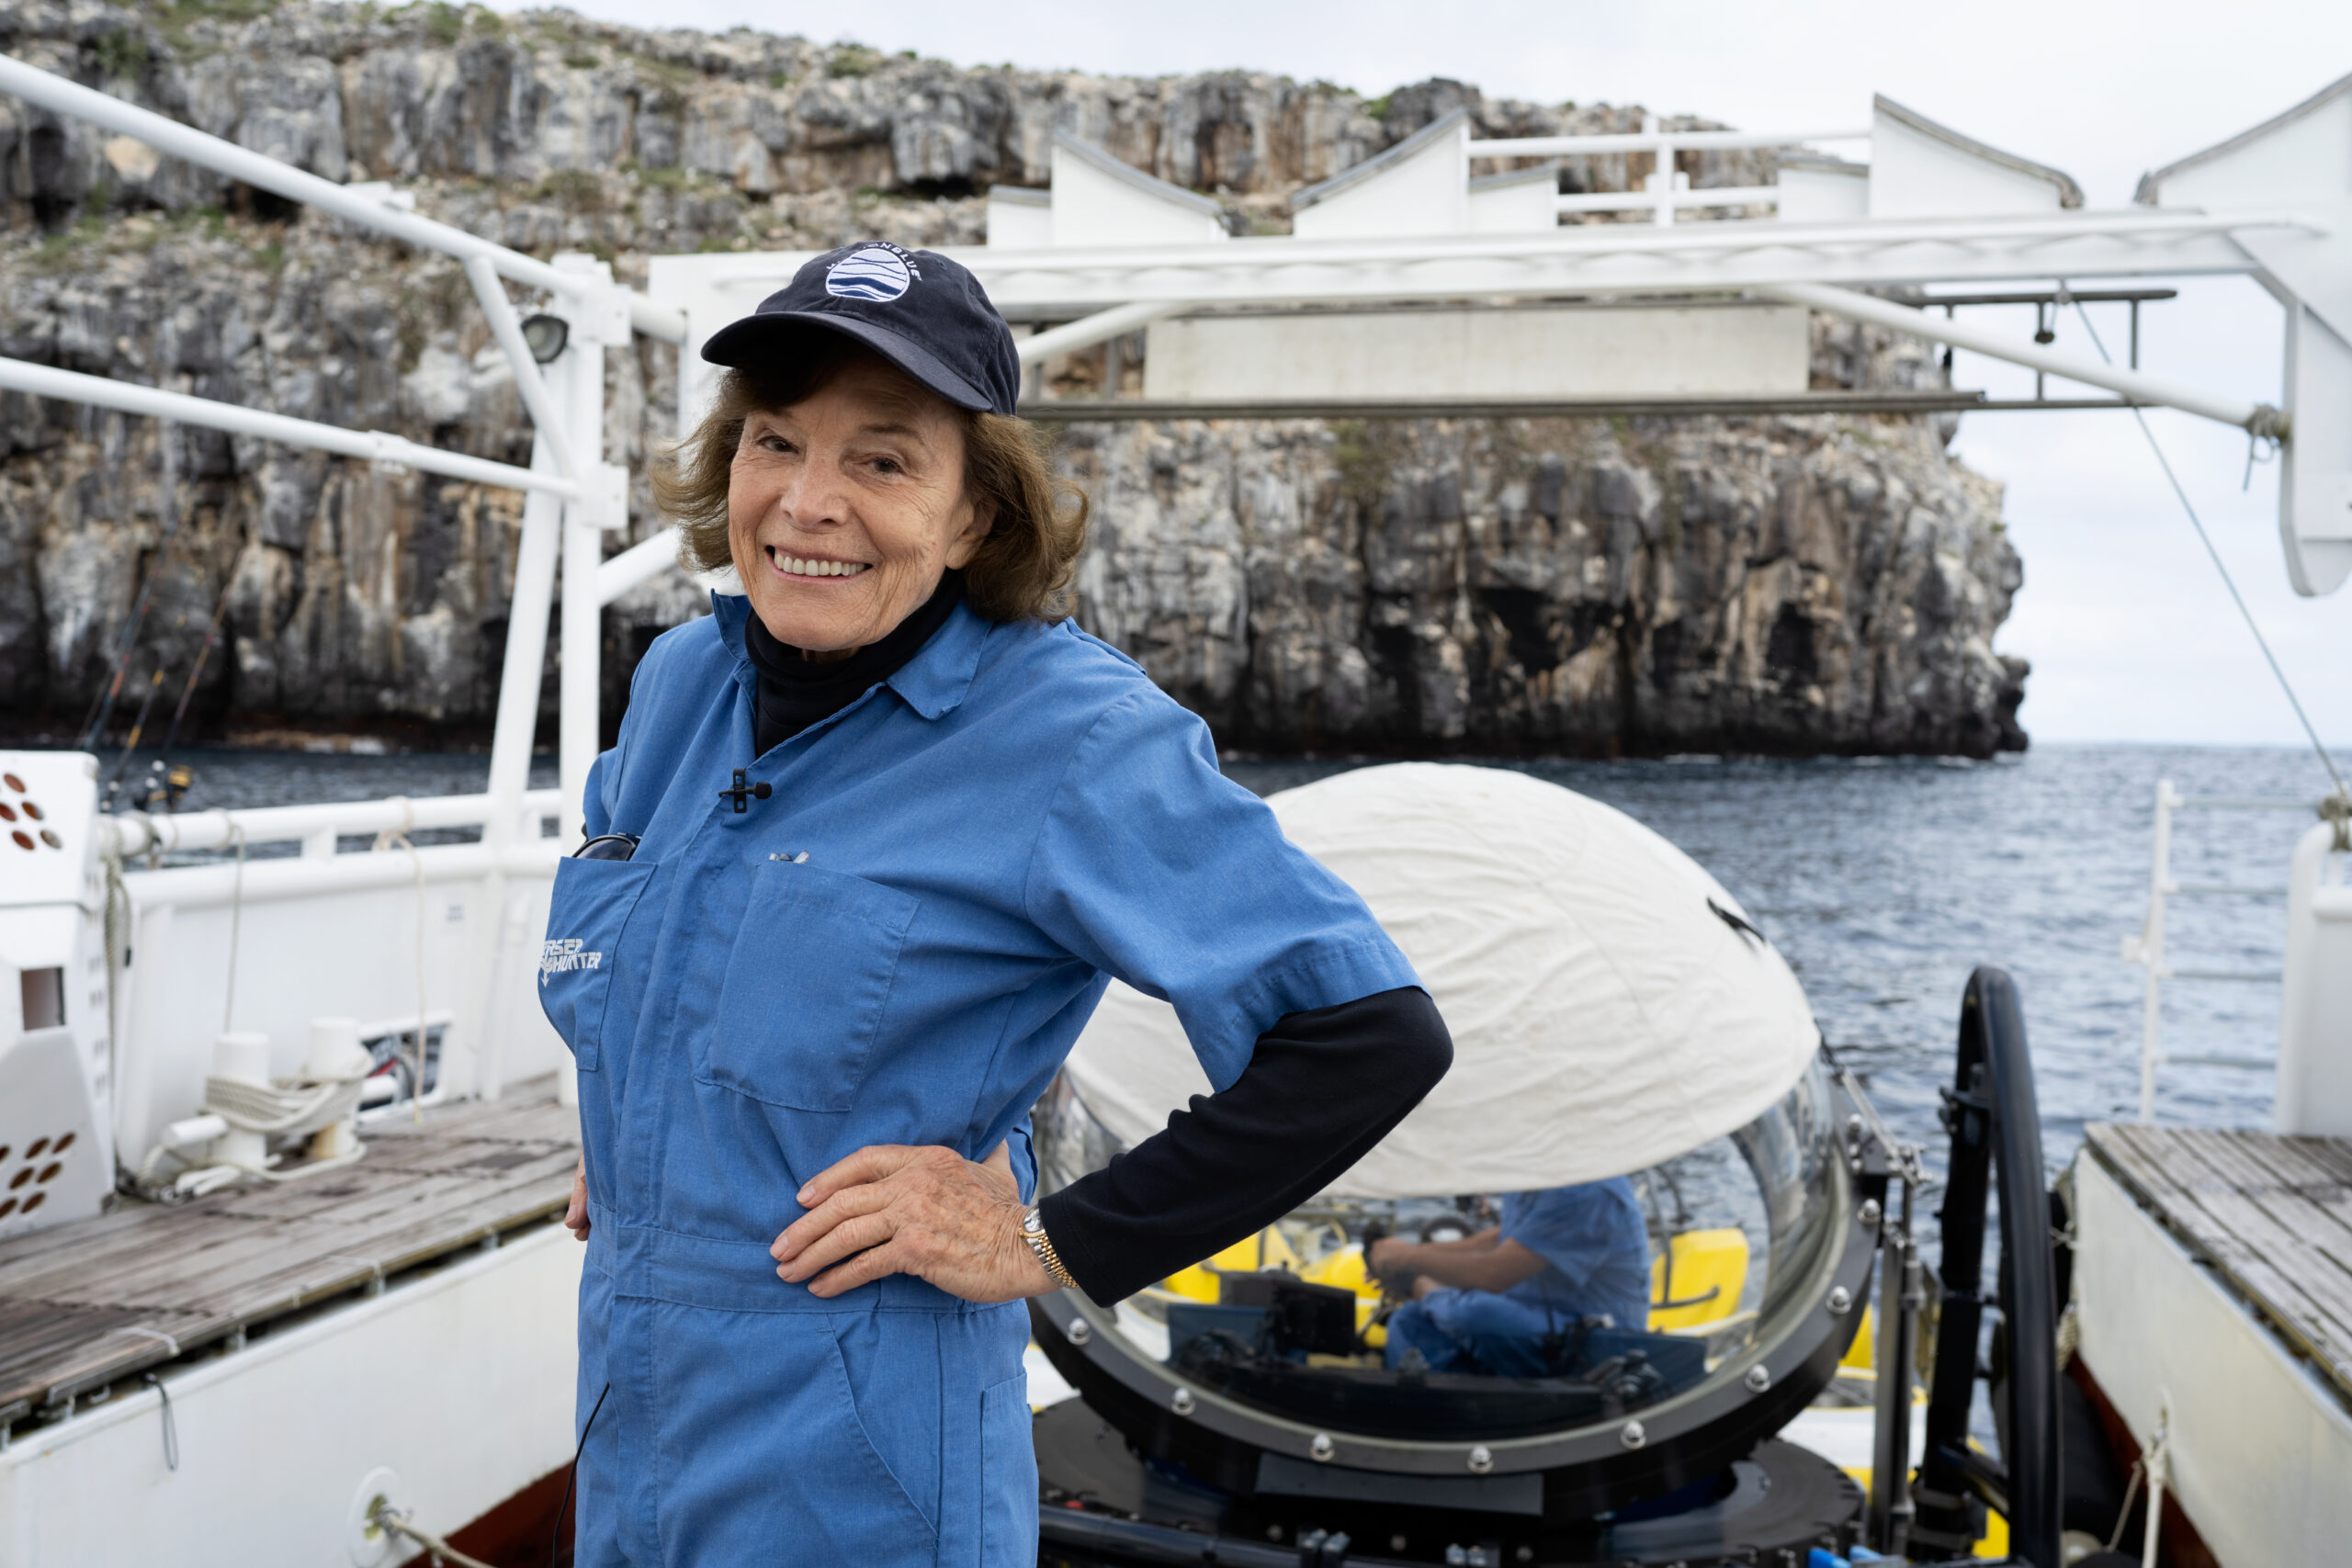 Sylvia Earle, Rolex Testimonee and founder of
Mission Blue, in front of the DeepSee
submersible. In 2022, she led an expedition
to the Galápagos Islands Hope Spot.